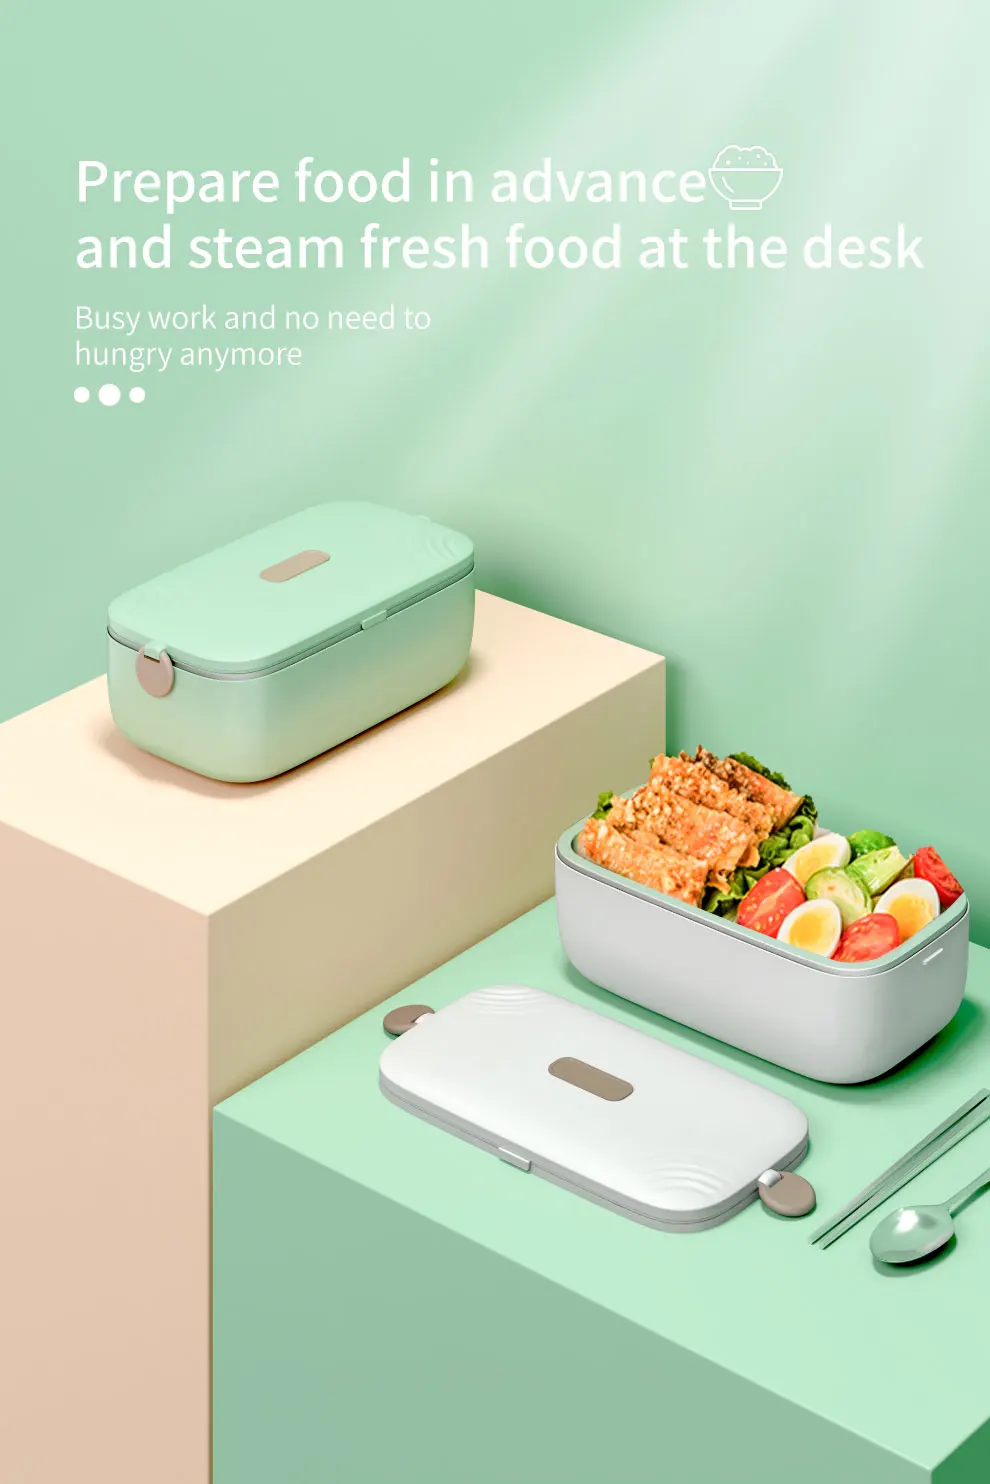 Electric Lunch Box Review: What The Heck Is It And How Does It Work? 